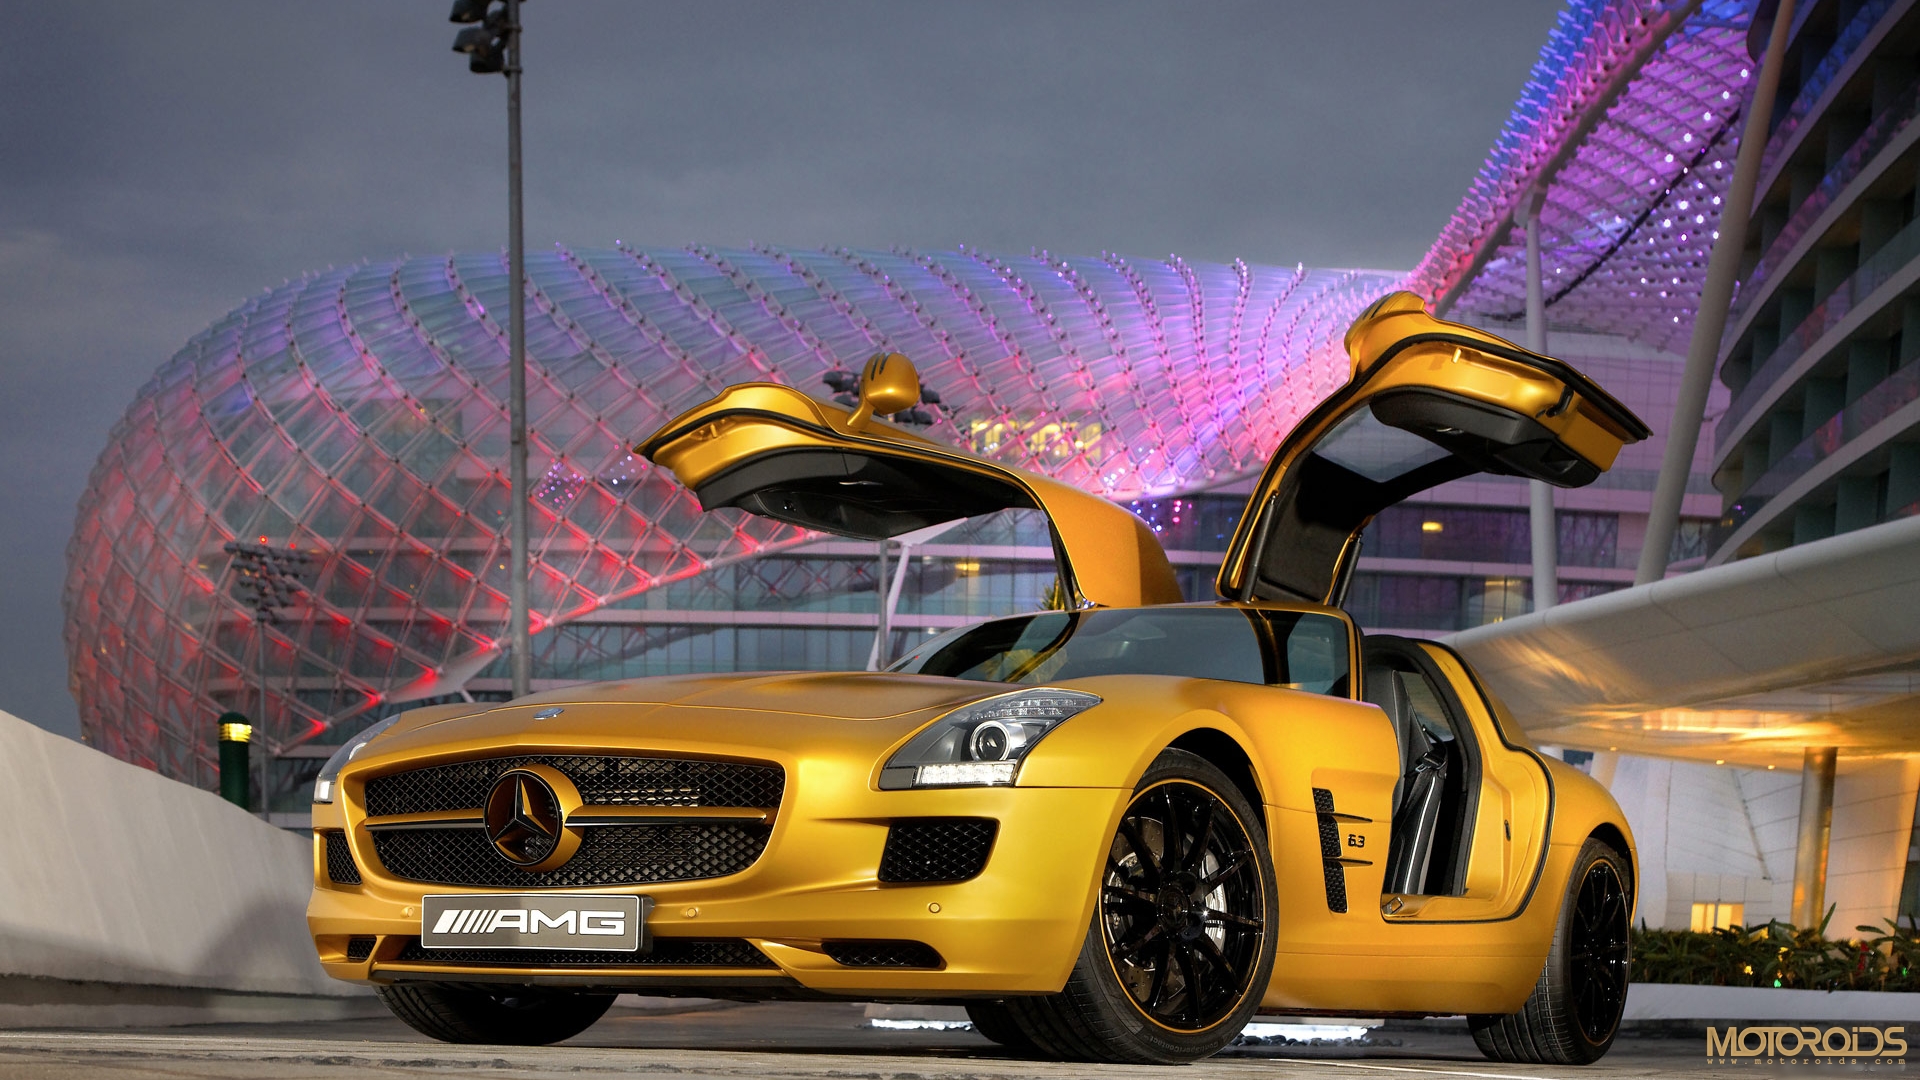 The Mercedes Benz SLS AMG has been launched in India. Price, delivery details, specifications and wallpapers/photos available on Motoroids.com